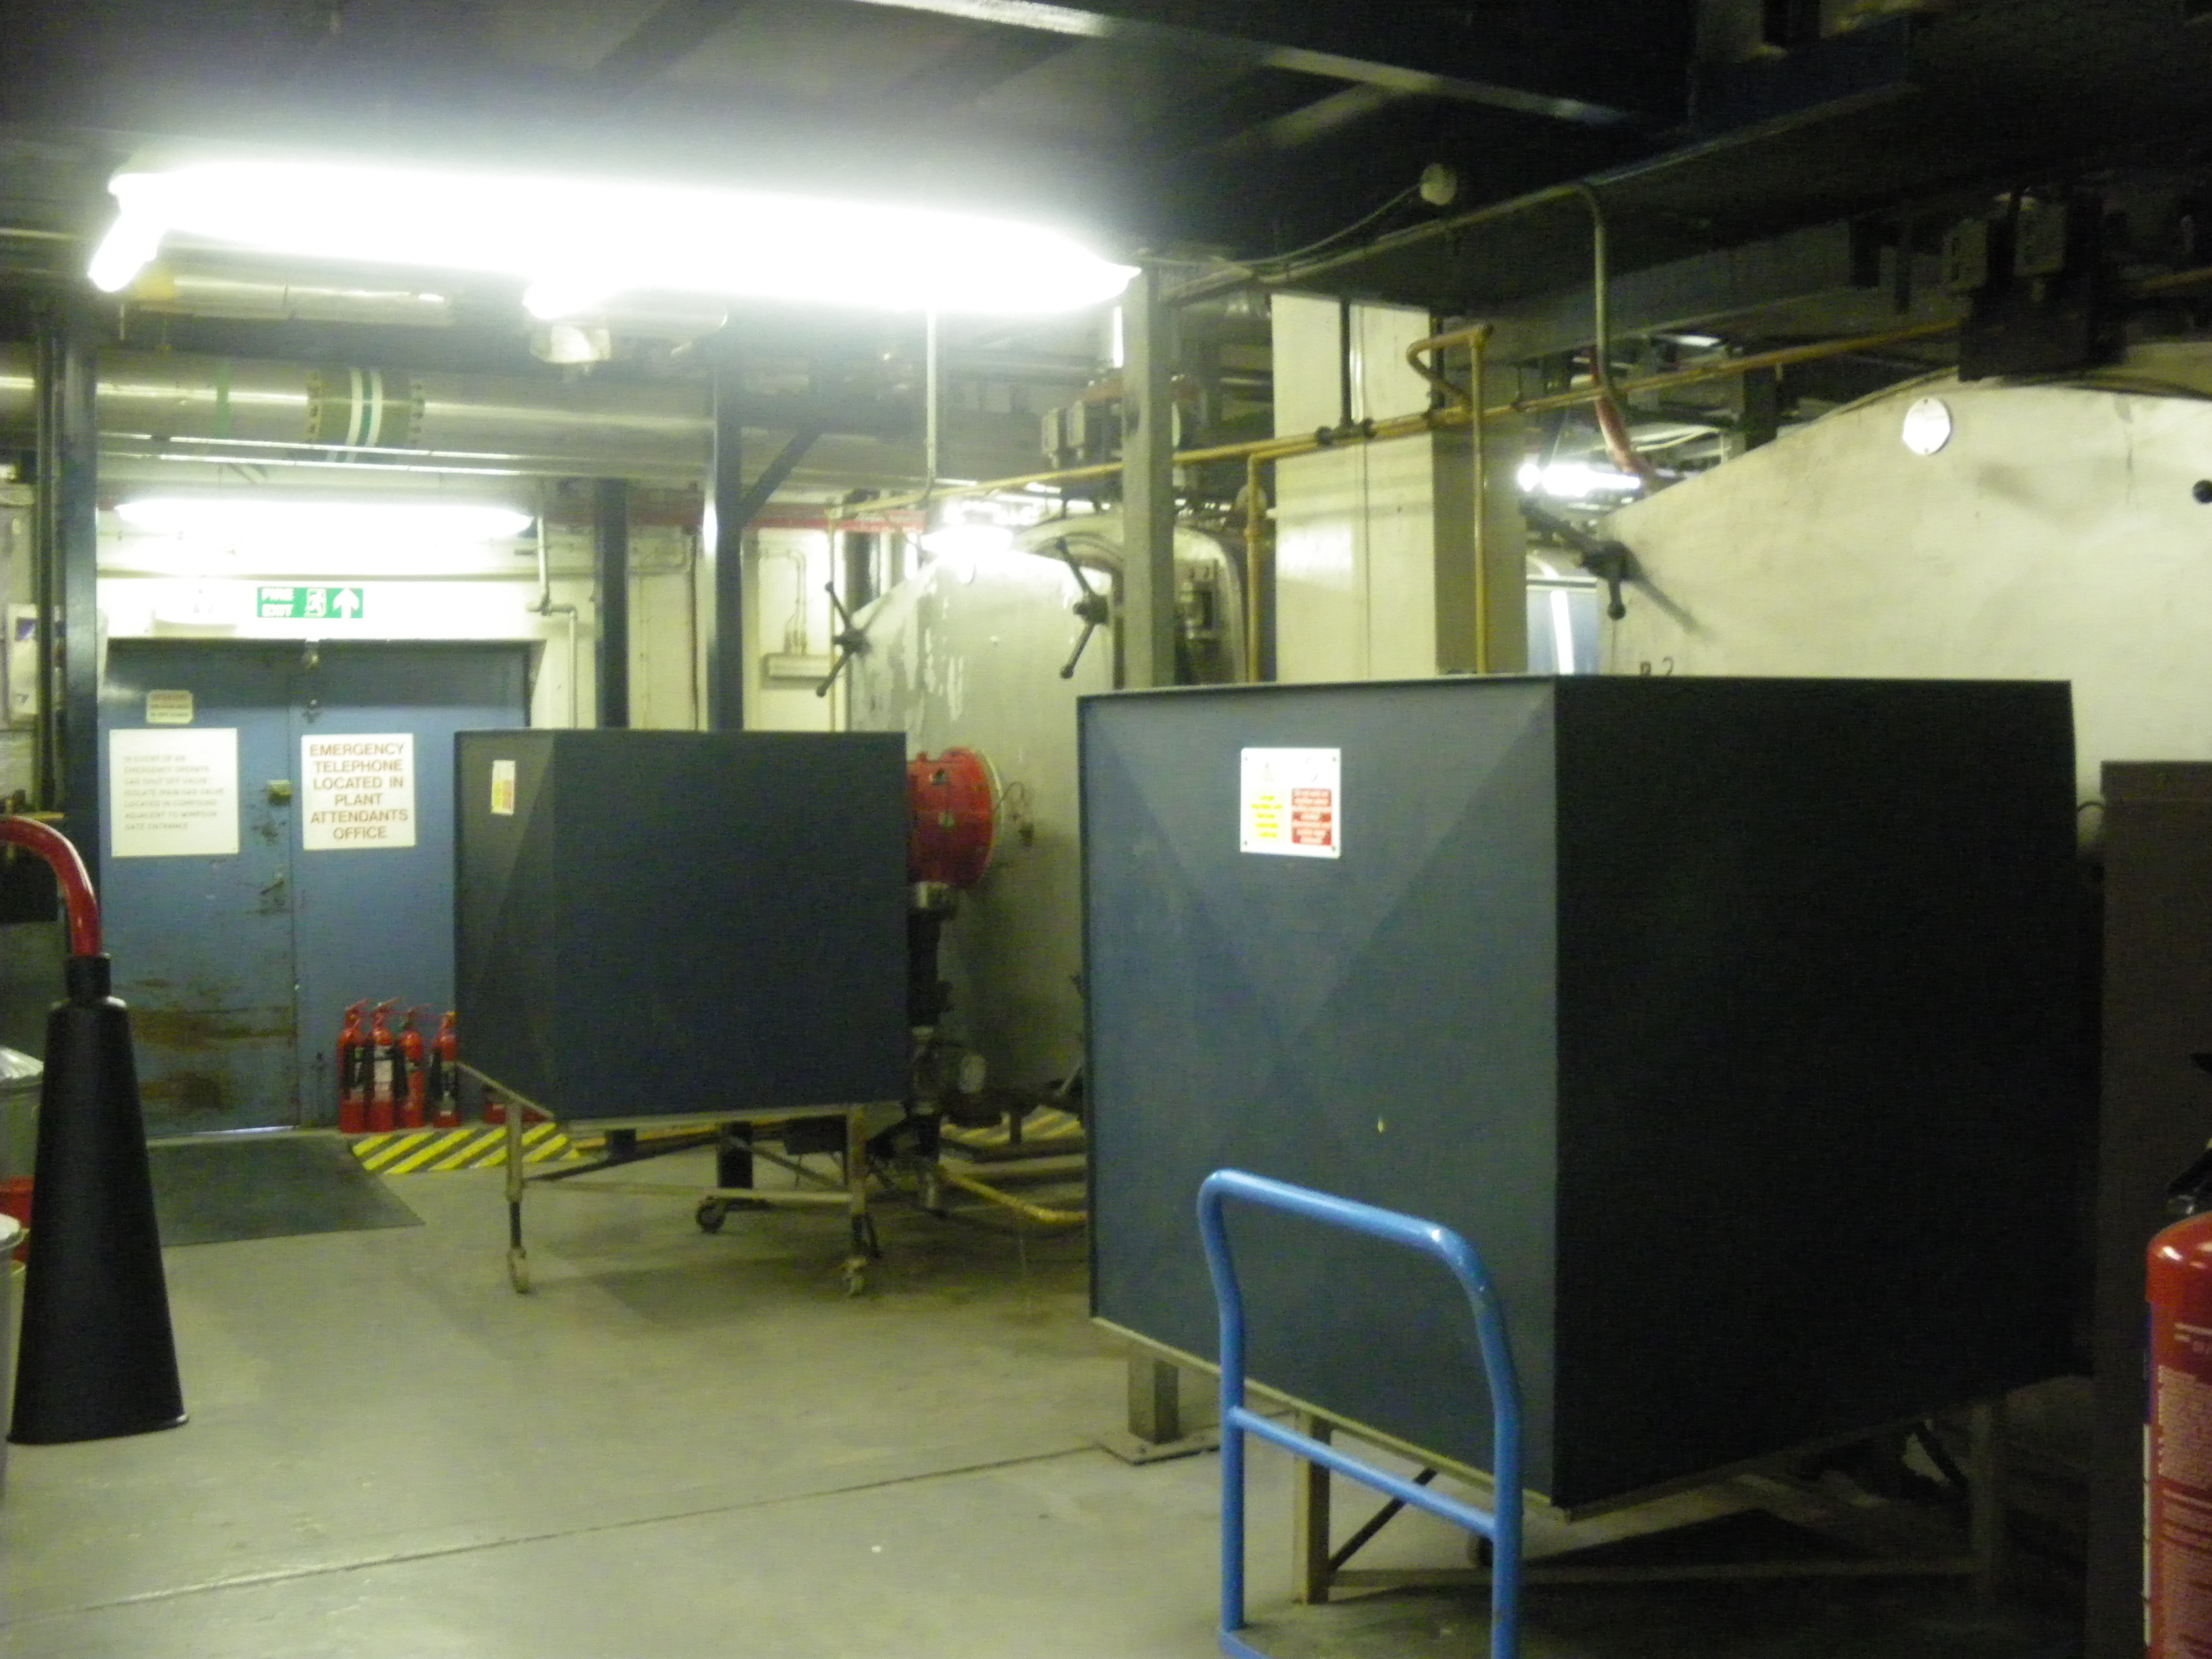 The two boilers and the main door to the Boiler House.